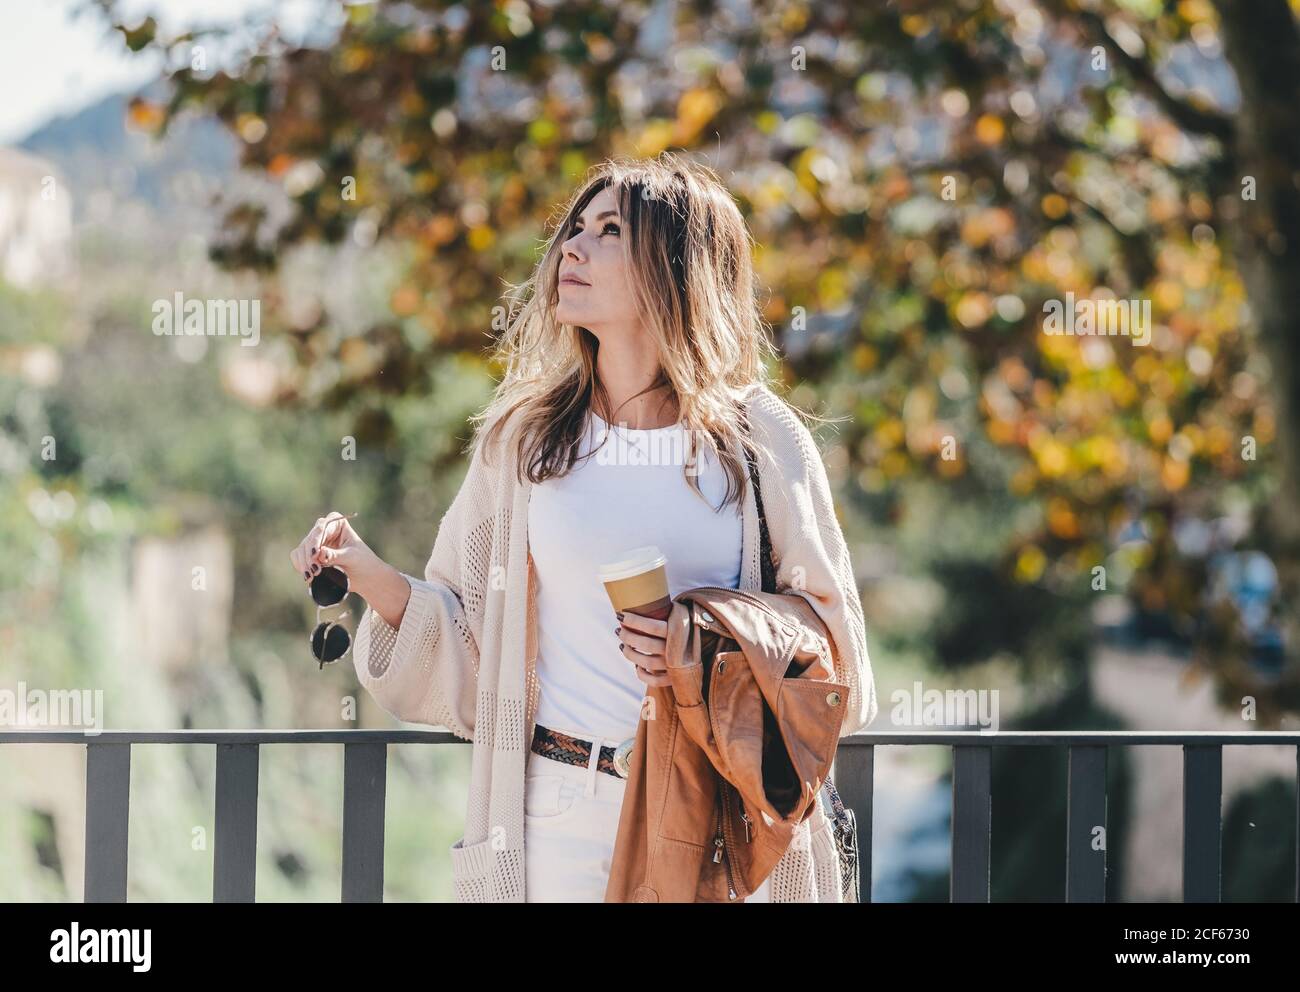 Attractive graceful woMan with coffee and jacket in hand looking along leaning on handhold in warm autumn day Stock Photo